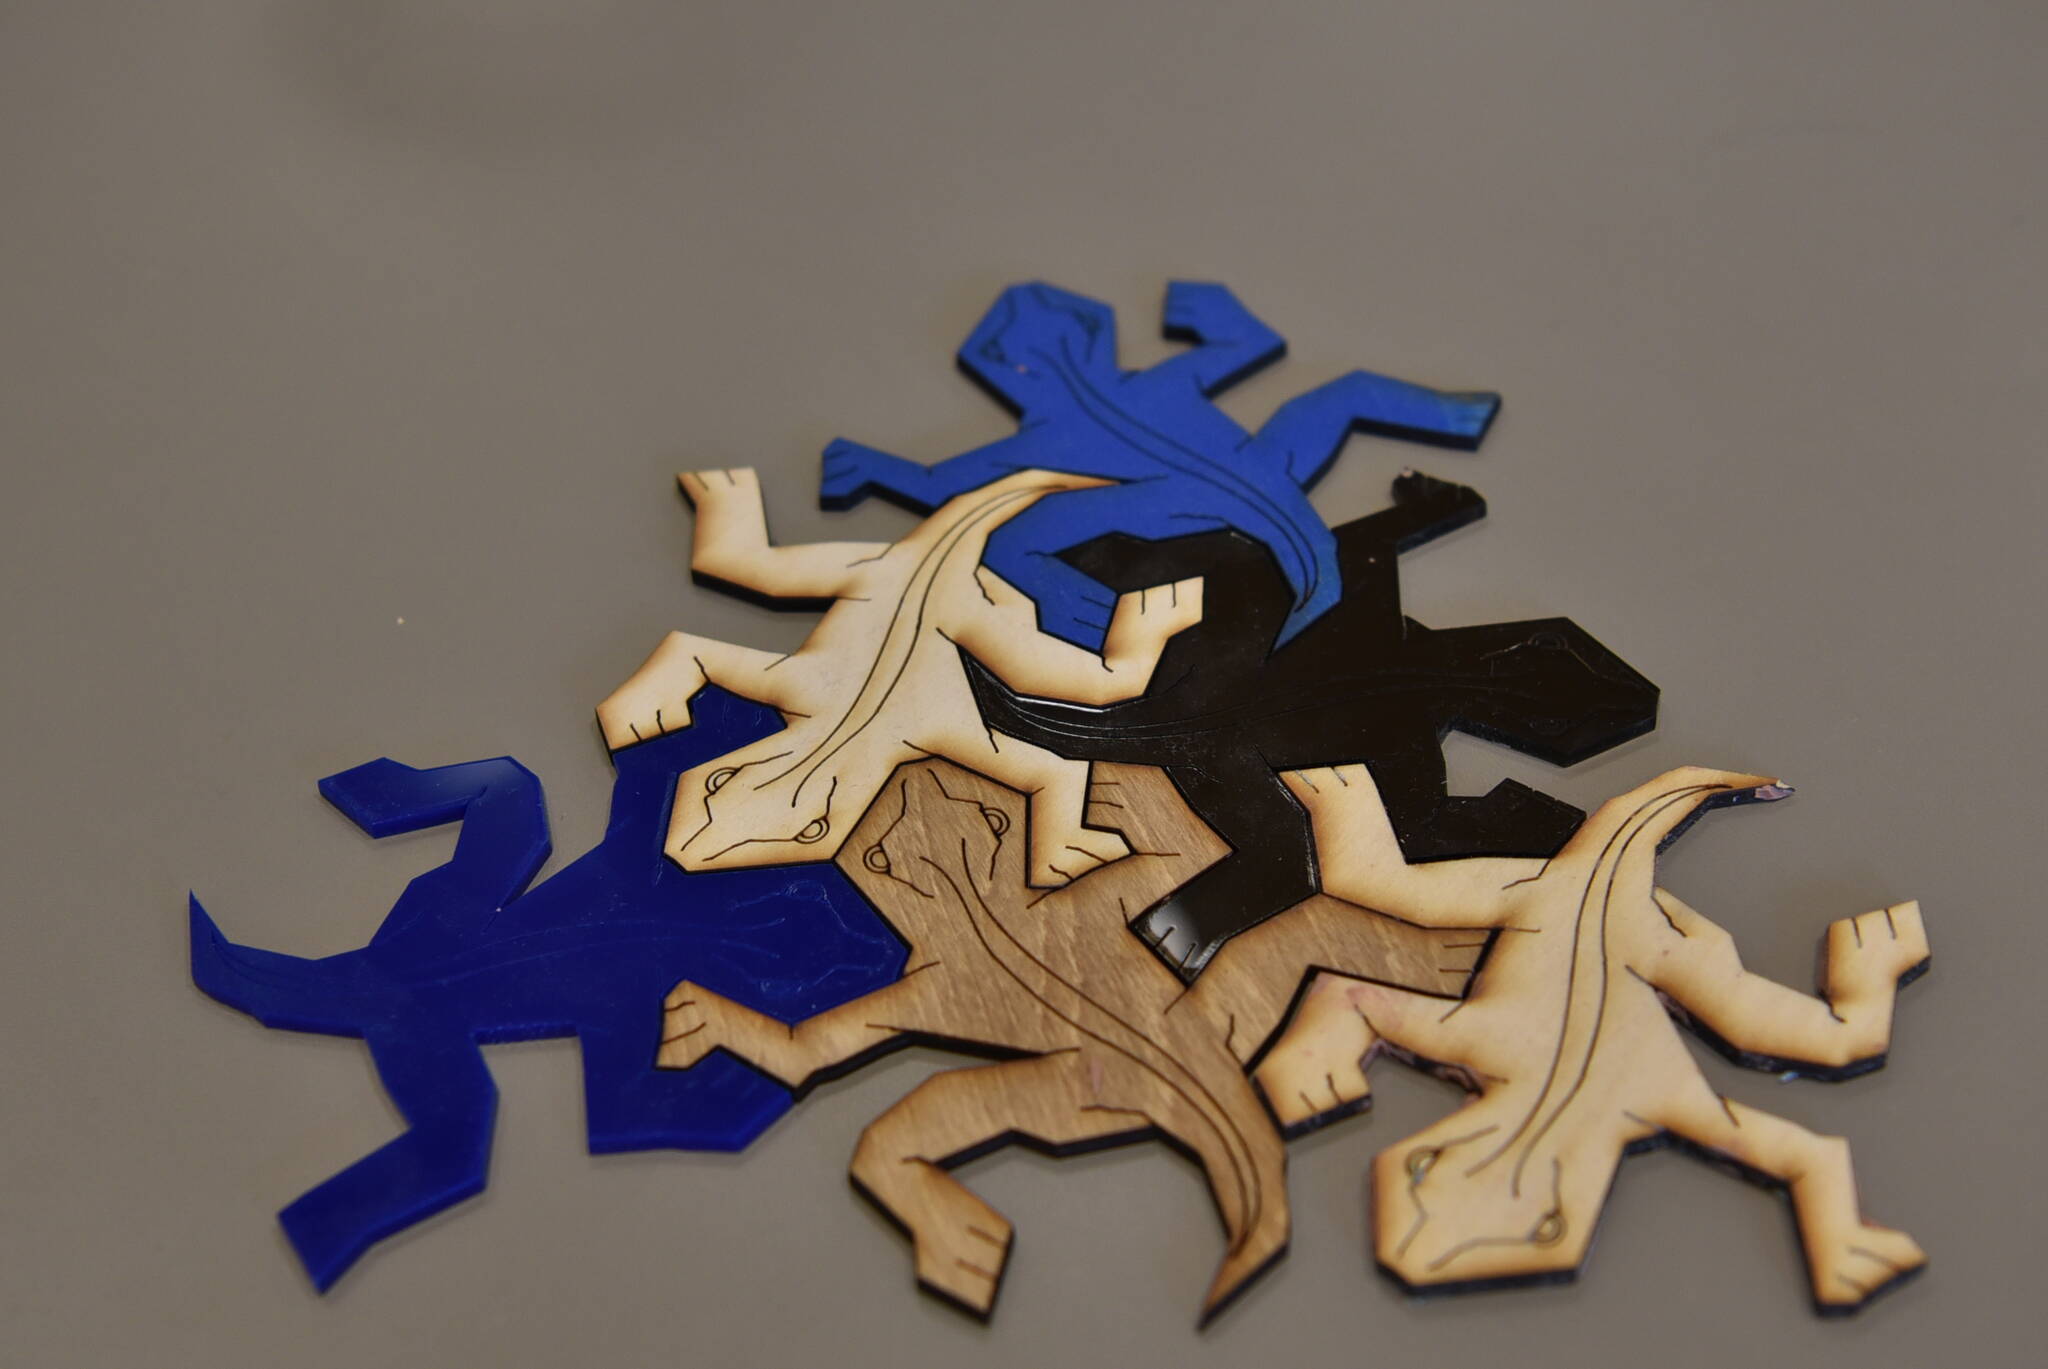 Lasercut puzzle pieces made in the Electronic & Technical Arts studio.